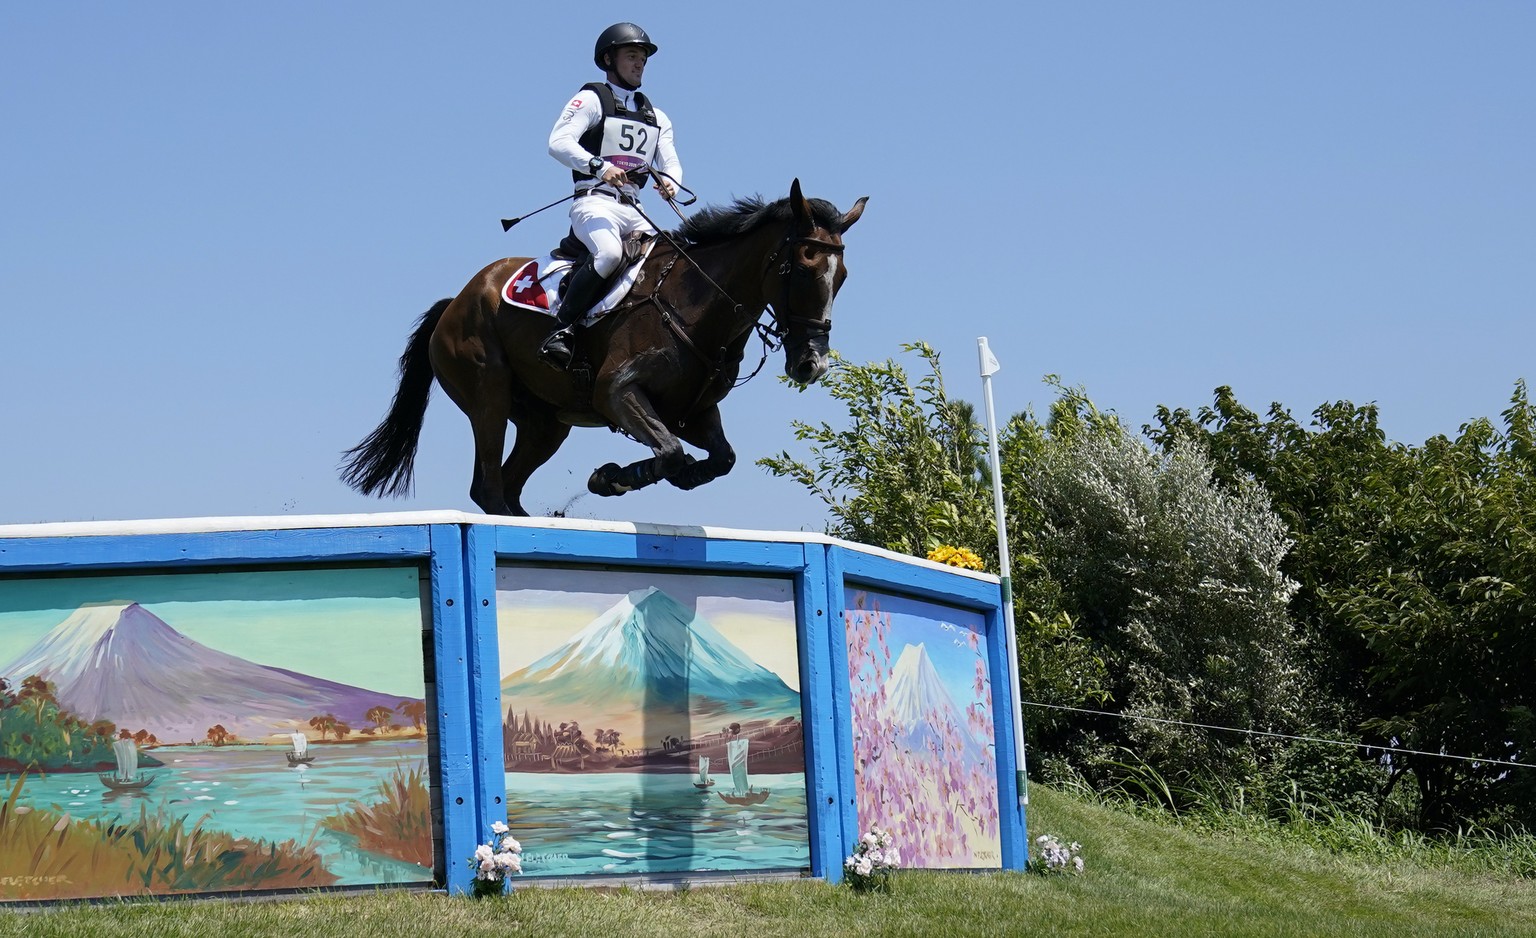 Switzerland&#039;s Robin Godel, riding Jet Set, competes during the Equestrian Eventing Cross Country competition at the Sea Forest Cross Country Course during the 2020 Summer Olympics, Sunday, Aug. 1 ...